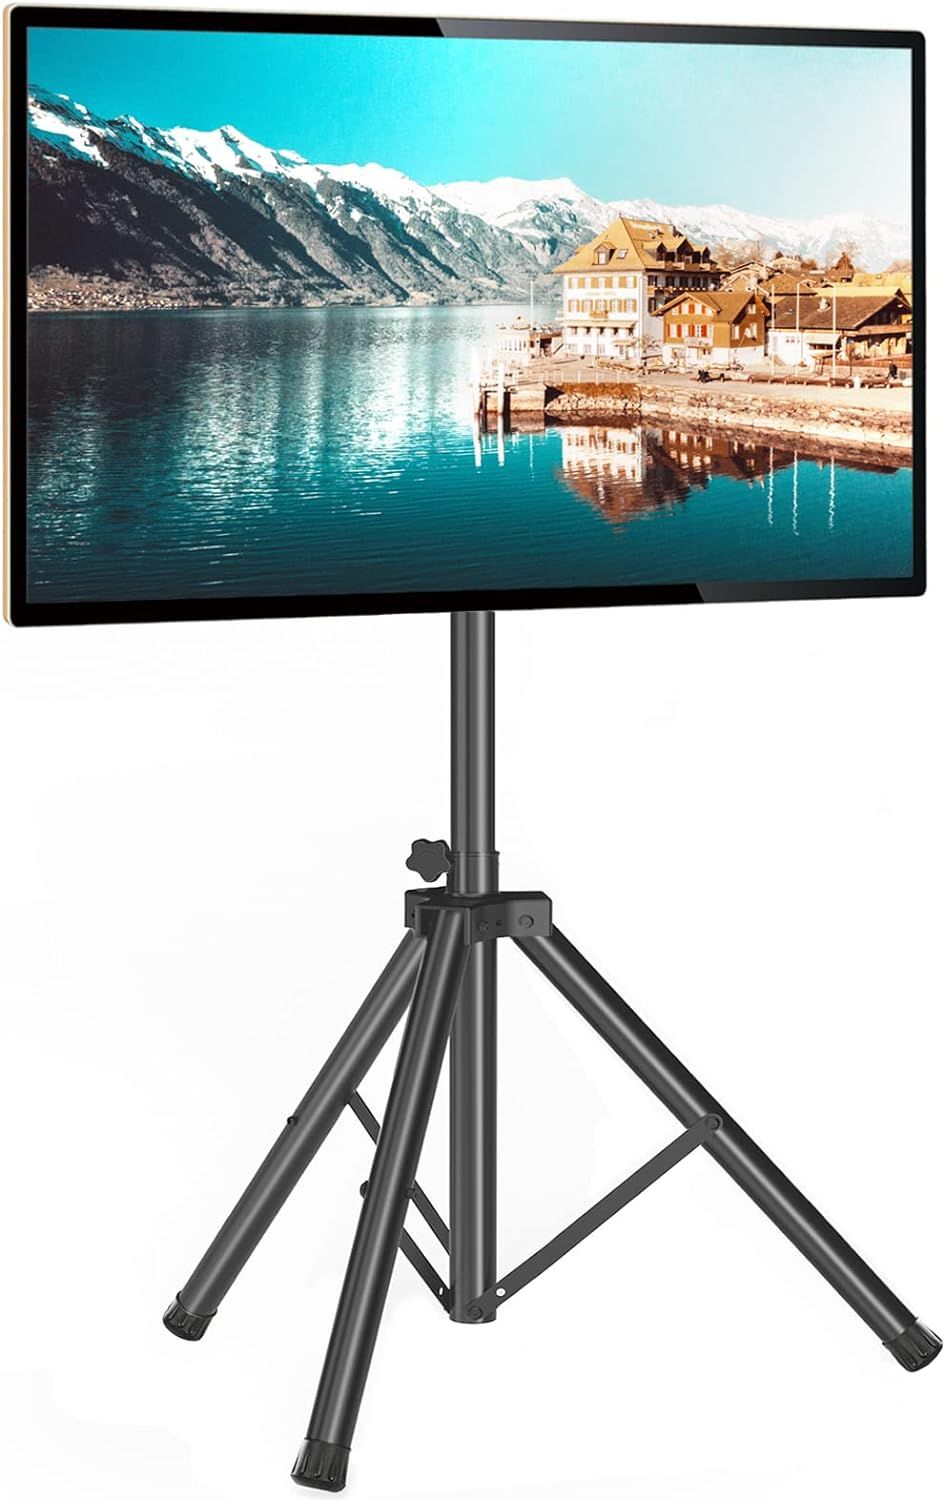 Portable Tv Tripod Stand Tilt Mount For 32 70 Inch India | Ubuy Inside Foldable Portable Adjustable Tv Stands (View 6 of 15)